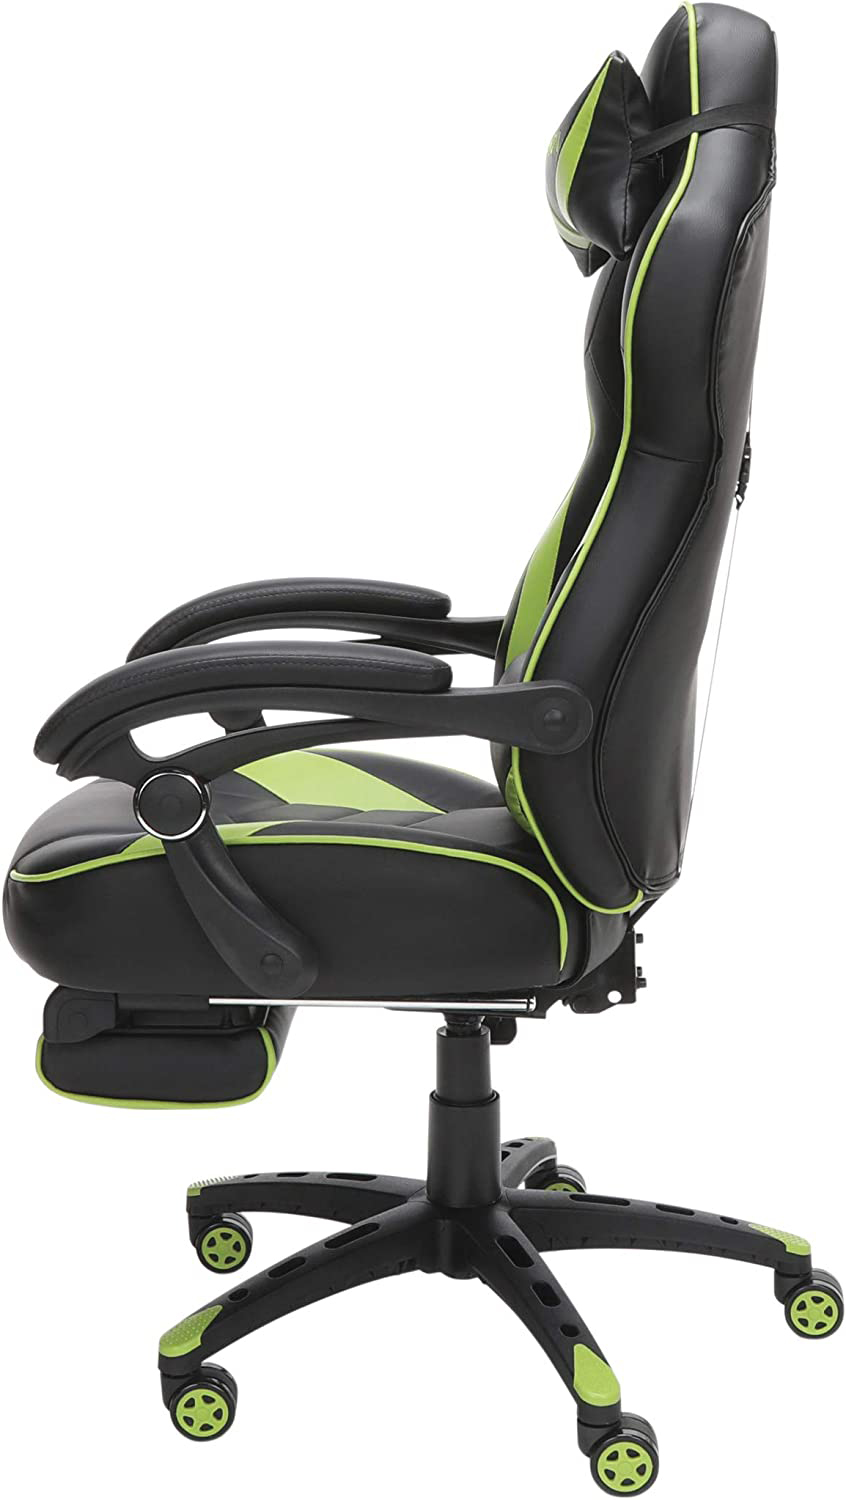 RESPAWN 110 Racing-style high back Ergonomic Chair with Footrest Recliner, Adjustable Lumbar Support, Headrest Pillow